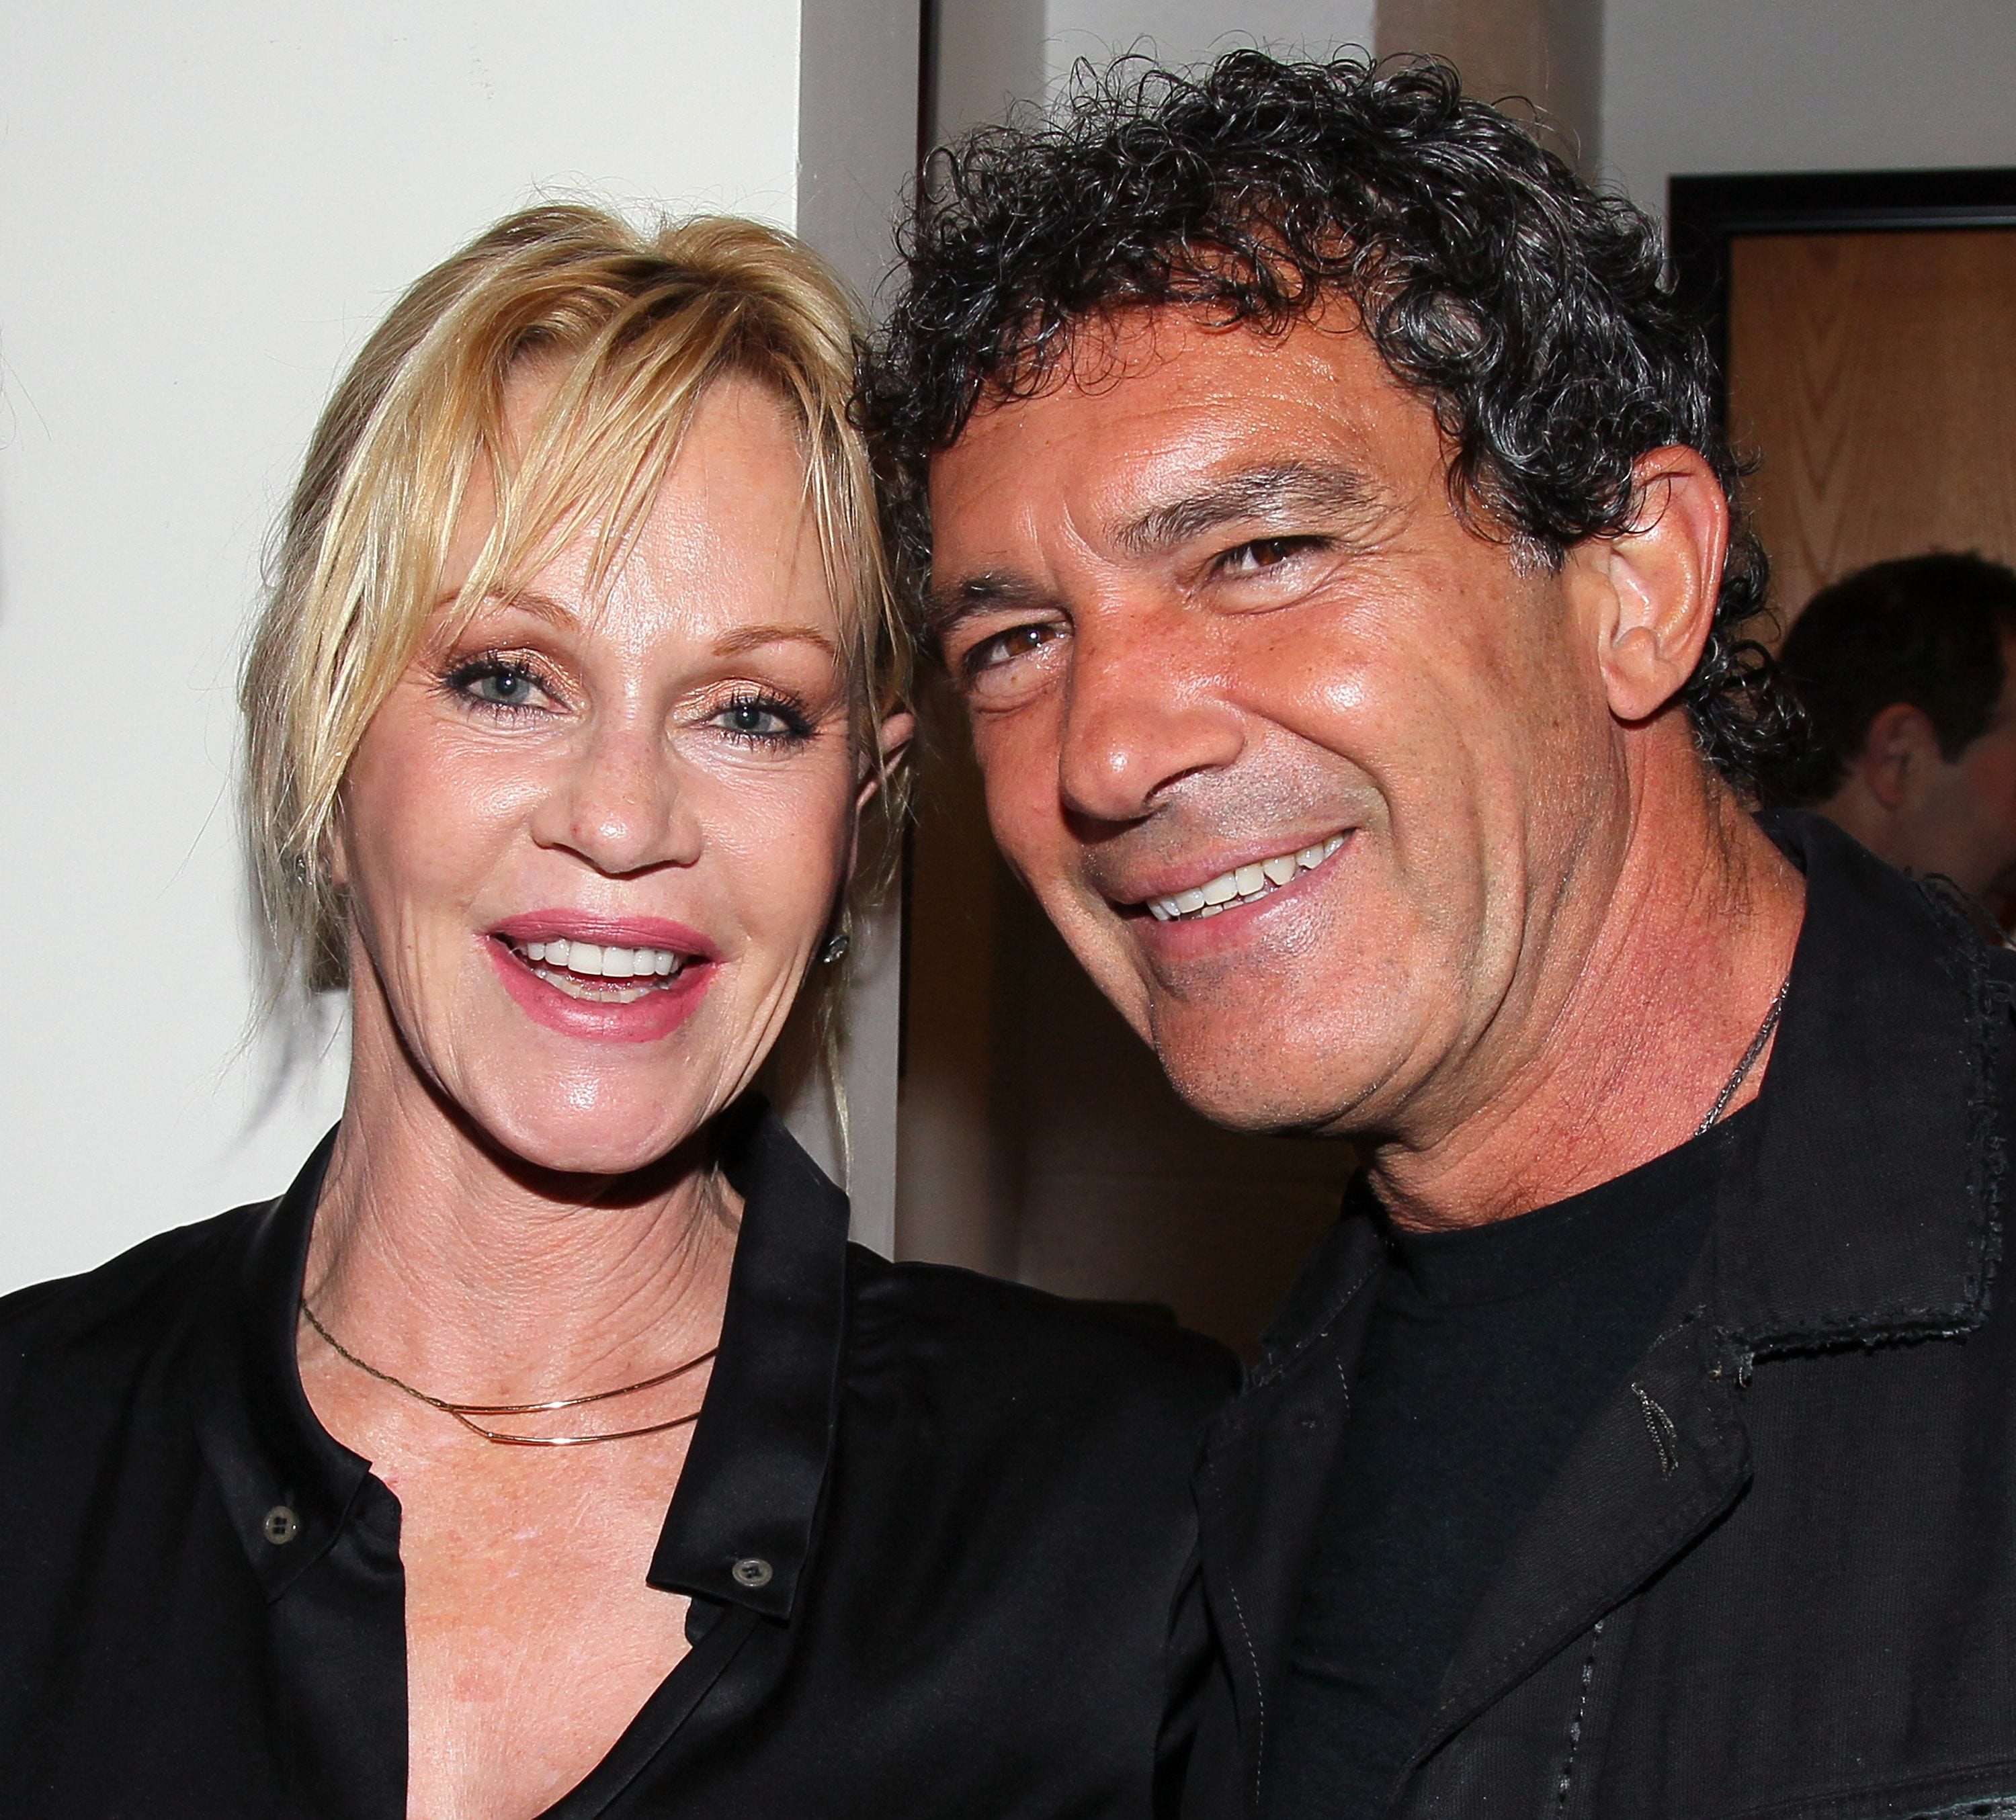 Antono Banderas opened up about how he and his ex-wife Melanie Griffith are able to successfully co-parent. (David Livingston/Getty Images)